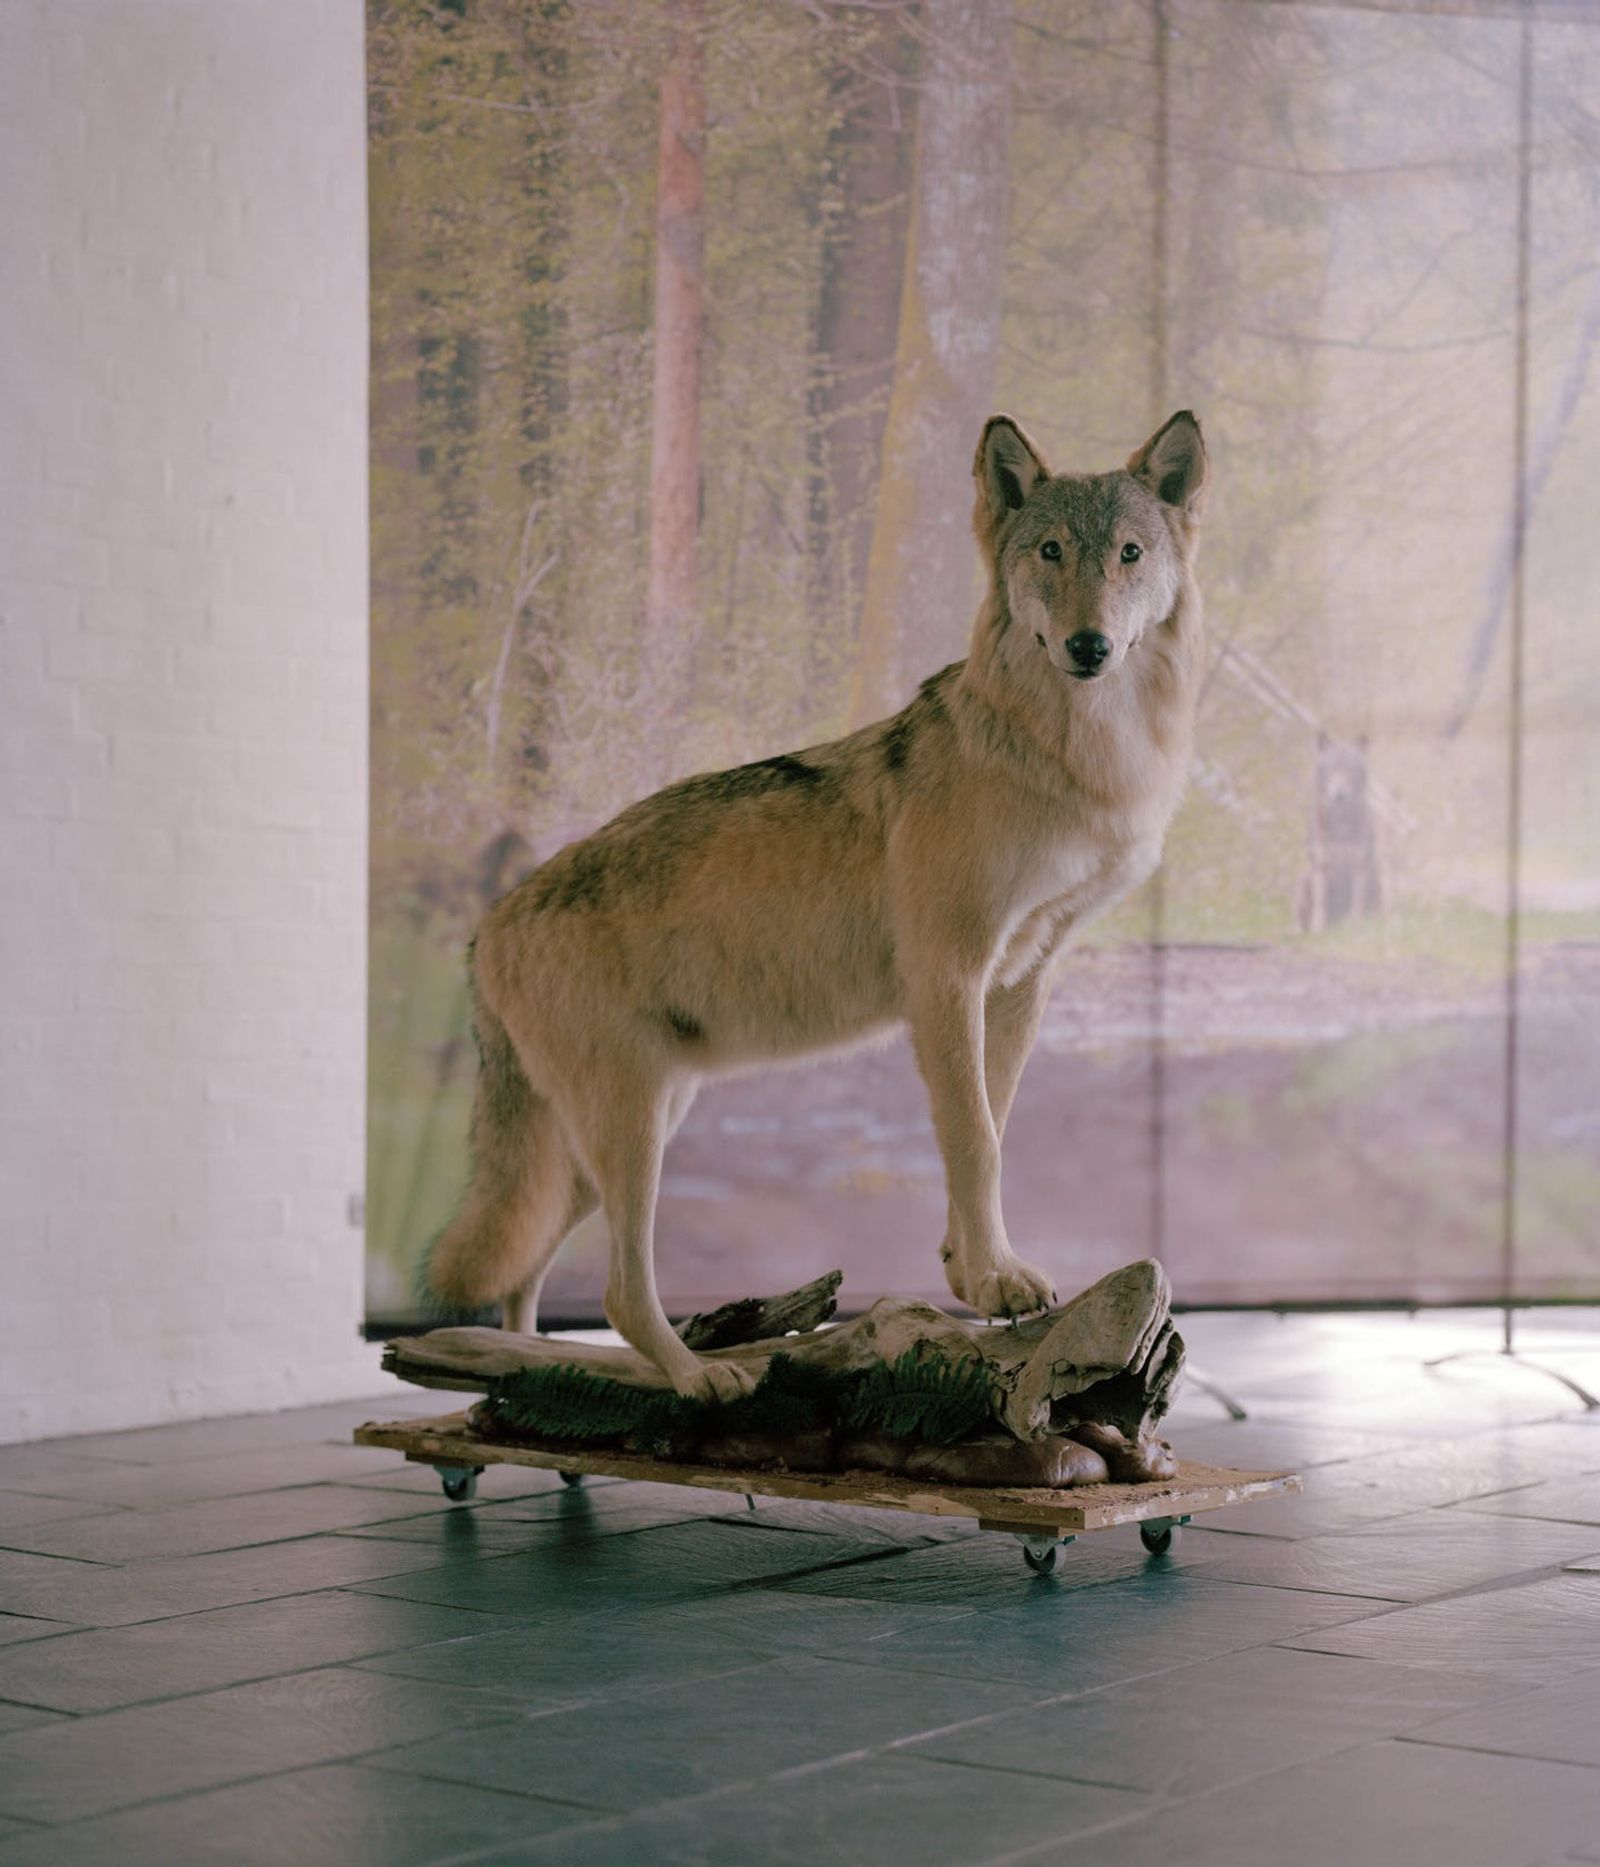 © Tobias Nicolai - Image from the Wolf land photography project